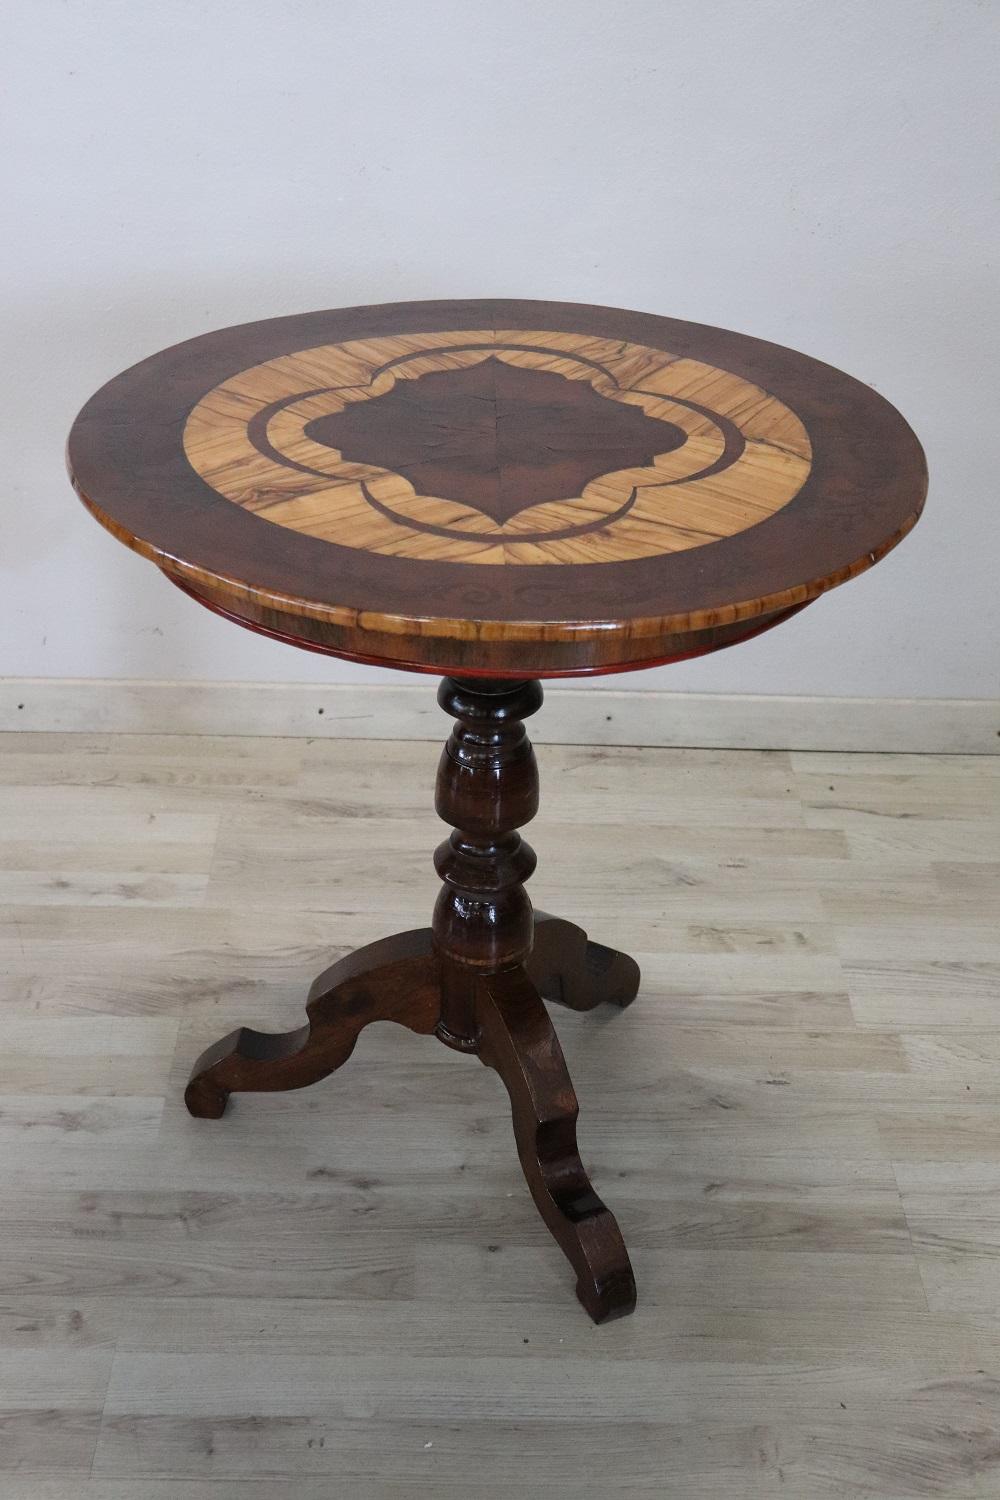 Rare and fine quality Italian round gueridon table or pedestal table. The top features refined inlay work with precious olive wood. The central stem is finely turned. Really delicious table.